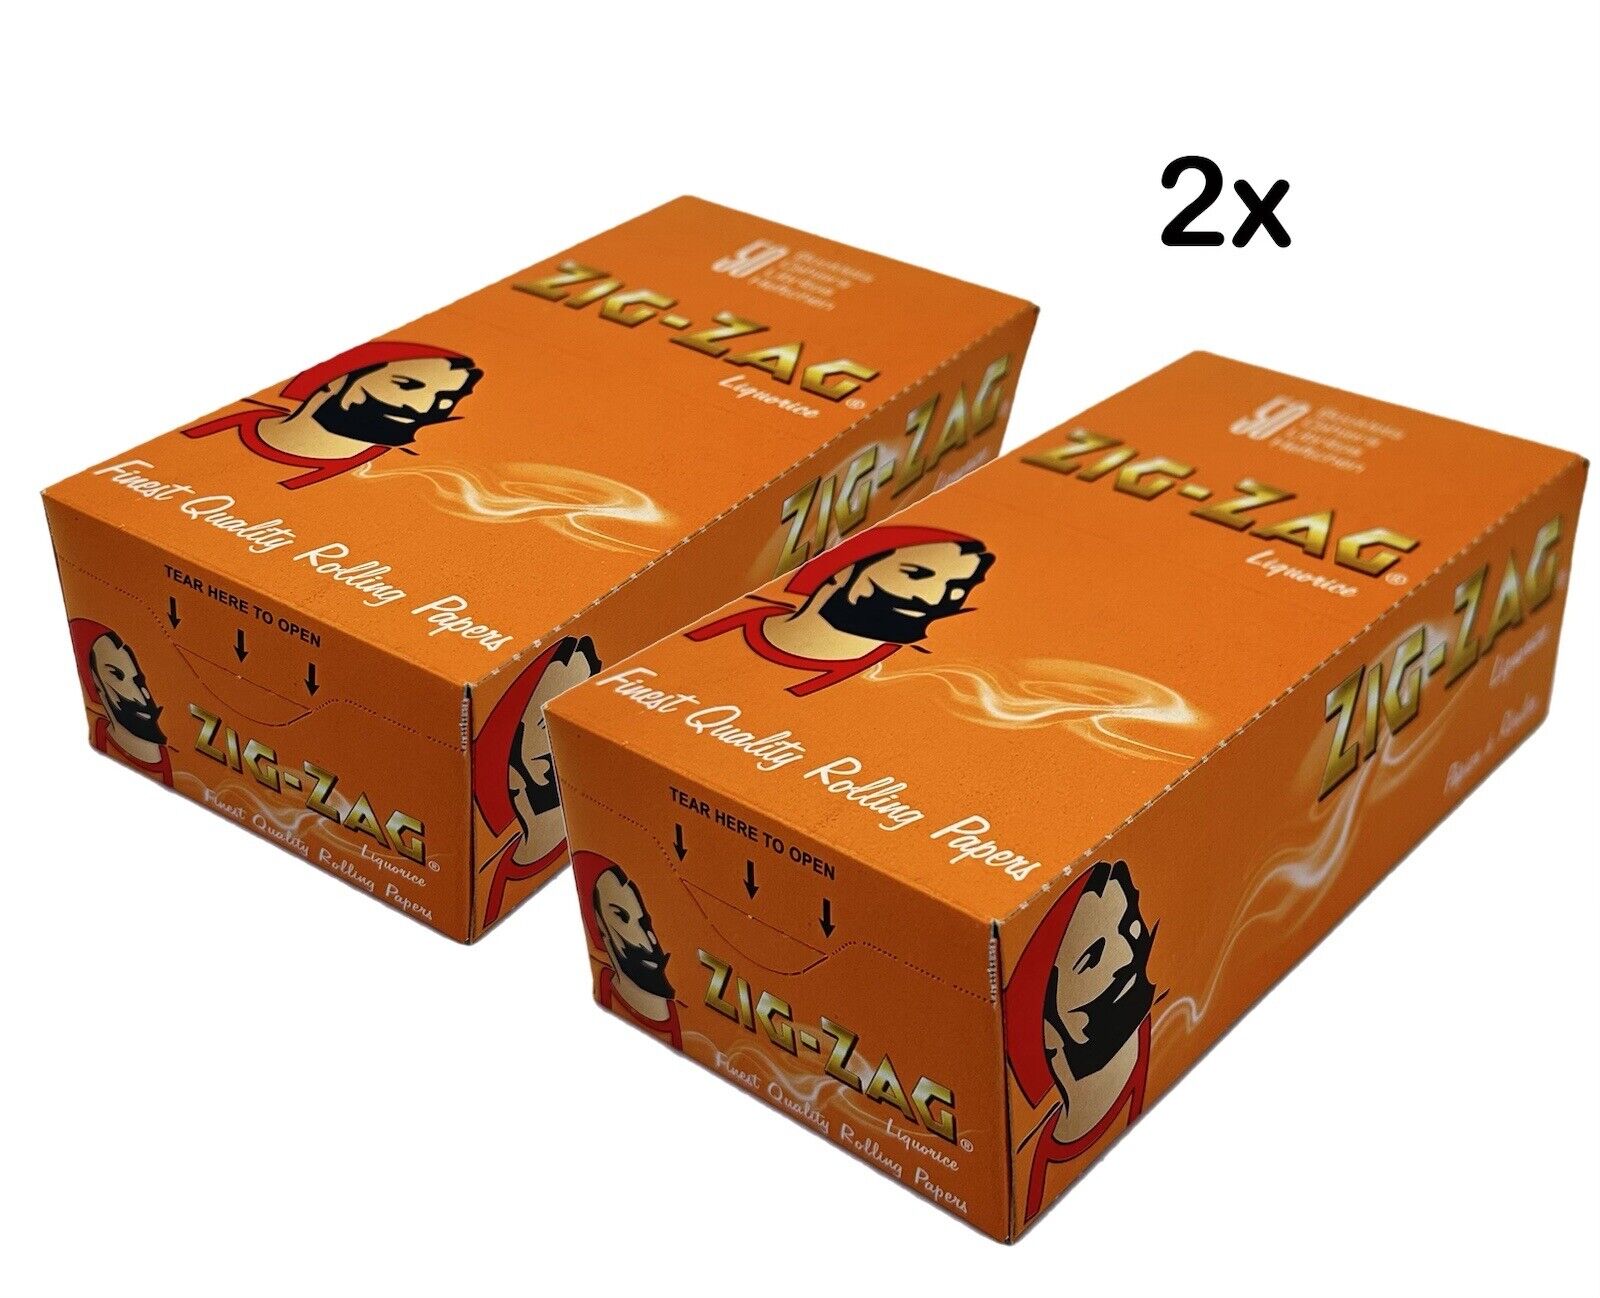 2 X Pack Of Liquorice Premium Zig Zag papers. Total 100 Booklets.  